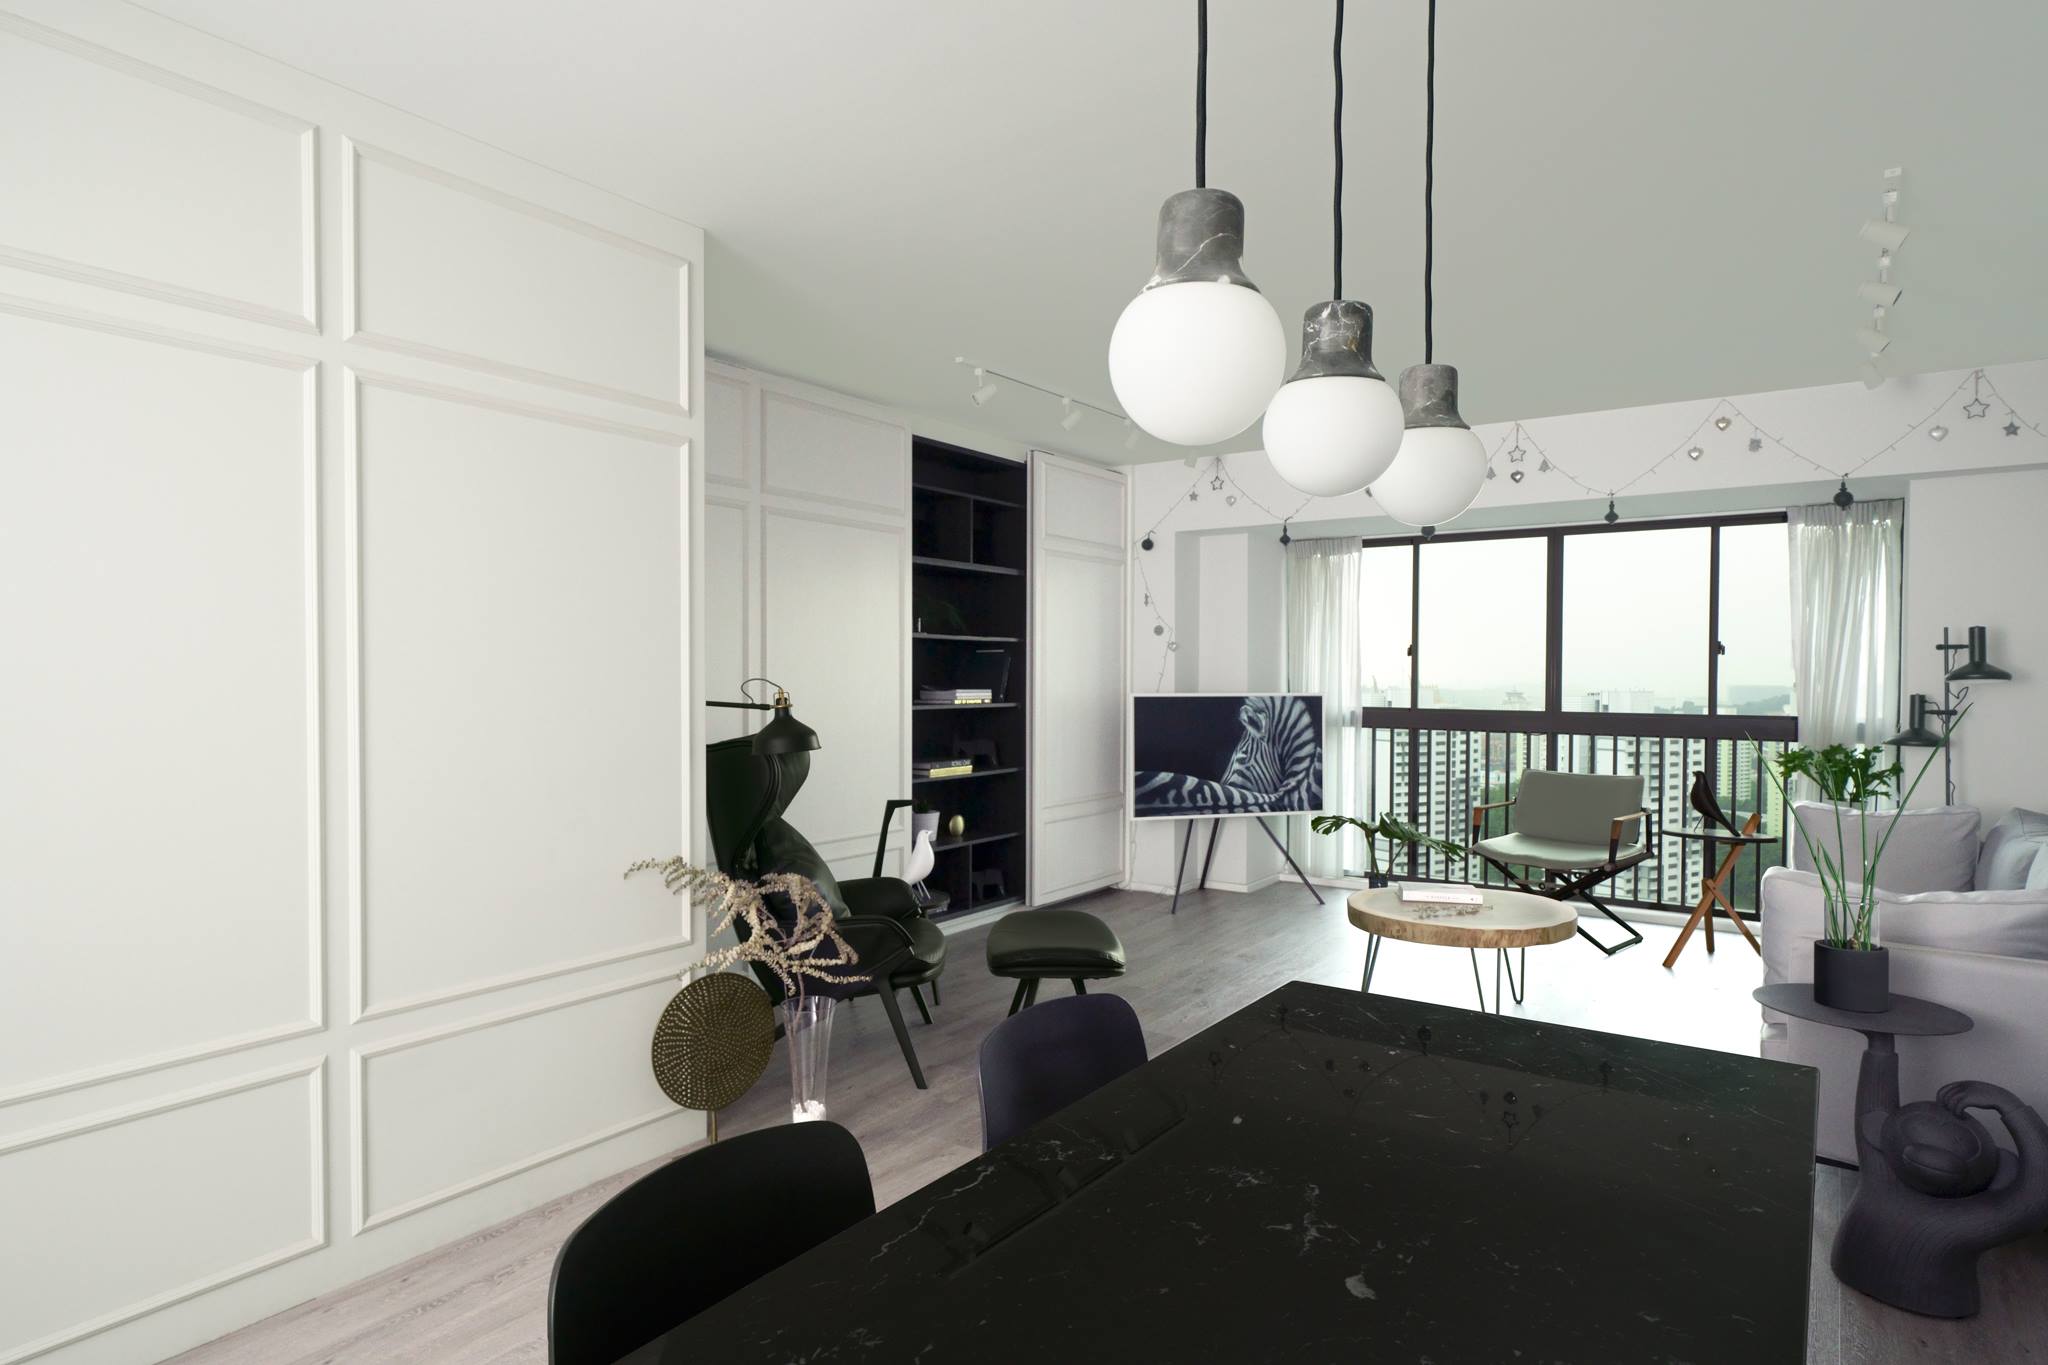 Condo Residential Project - Black N White 3